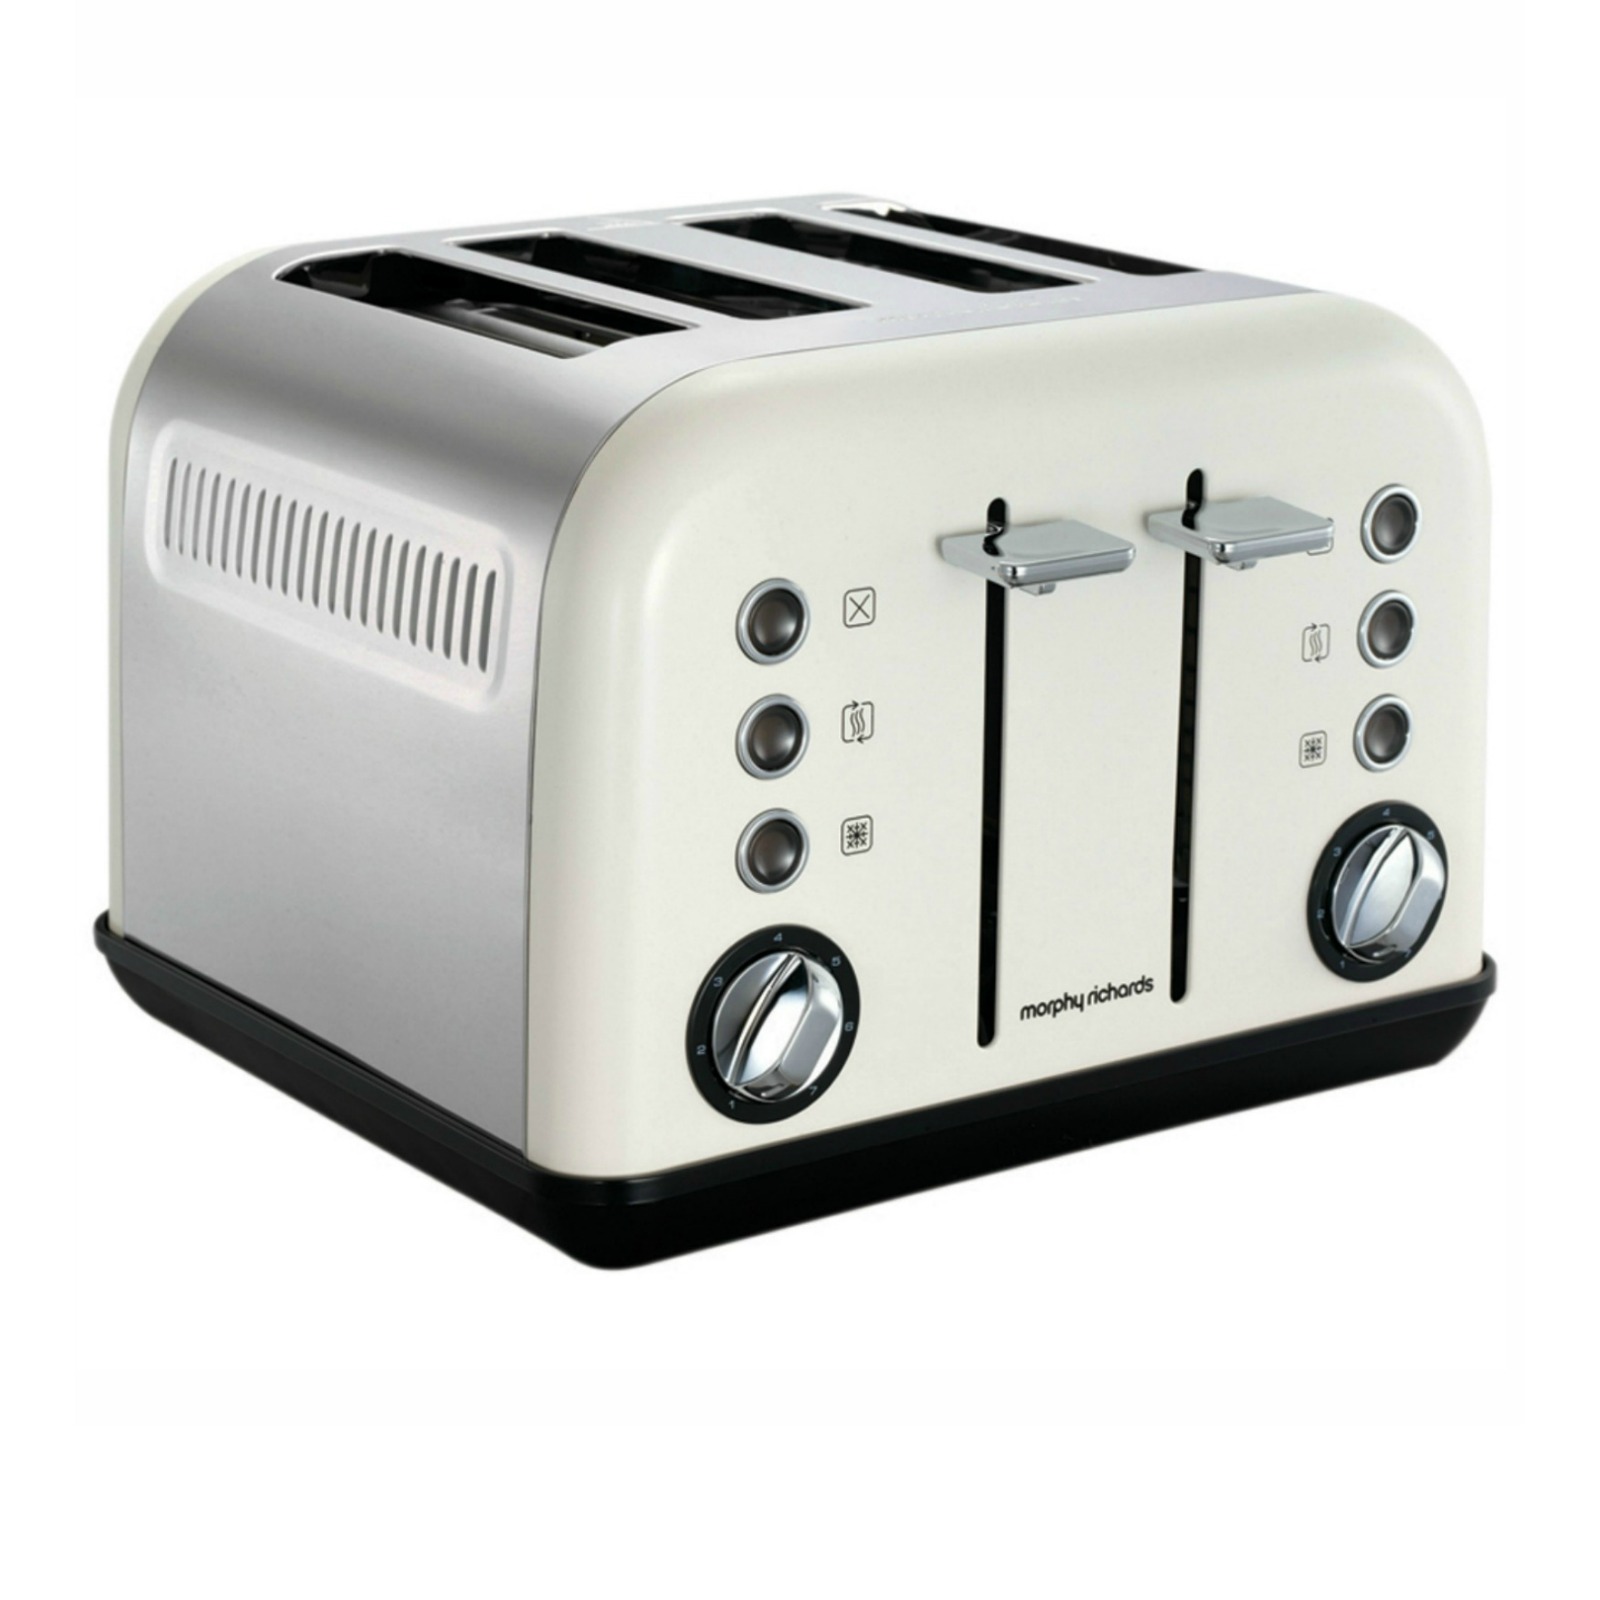 Morphy Richards 4 Slice Toaster: White Accents